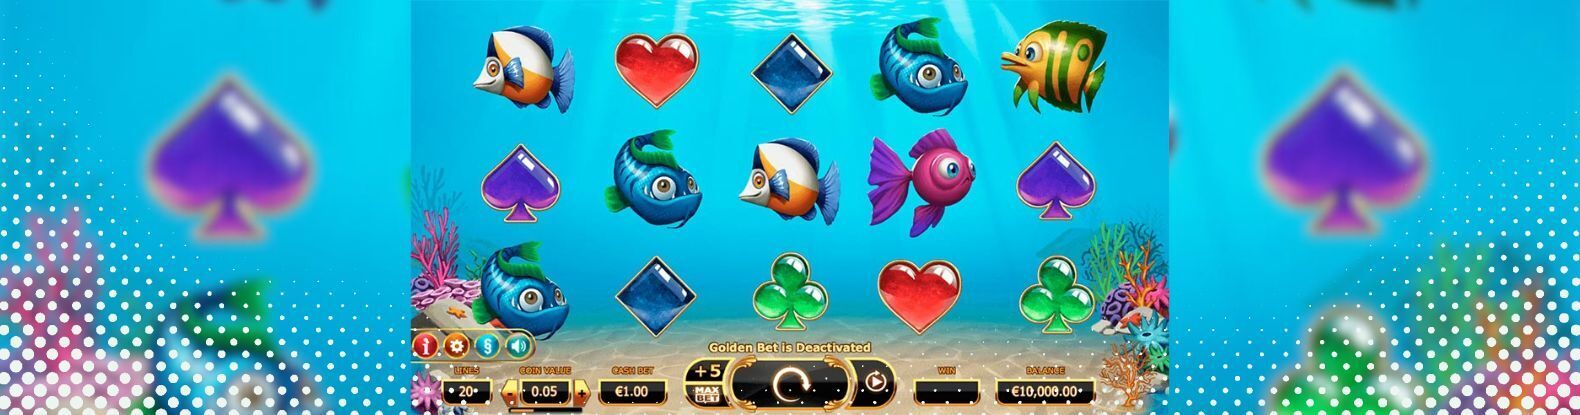 This is a screenshot of Golden Fish Tank Online Pokies Game by Yggdrasil